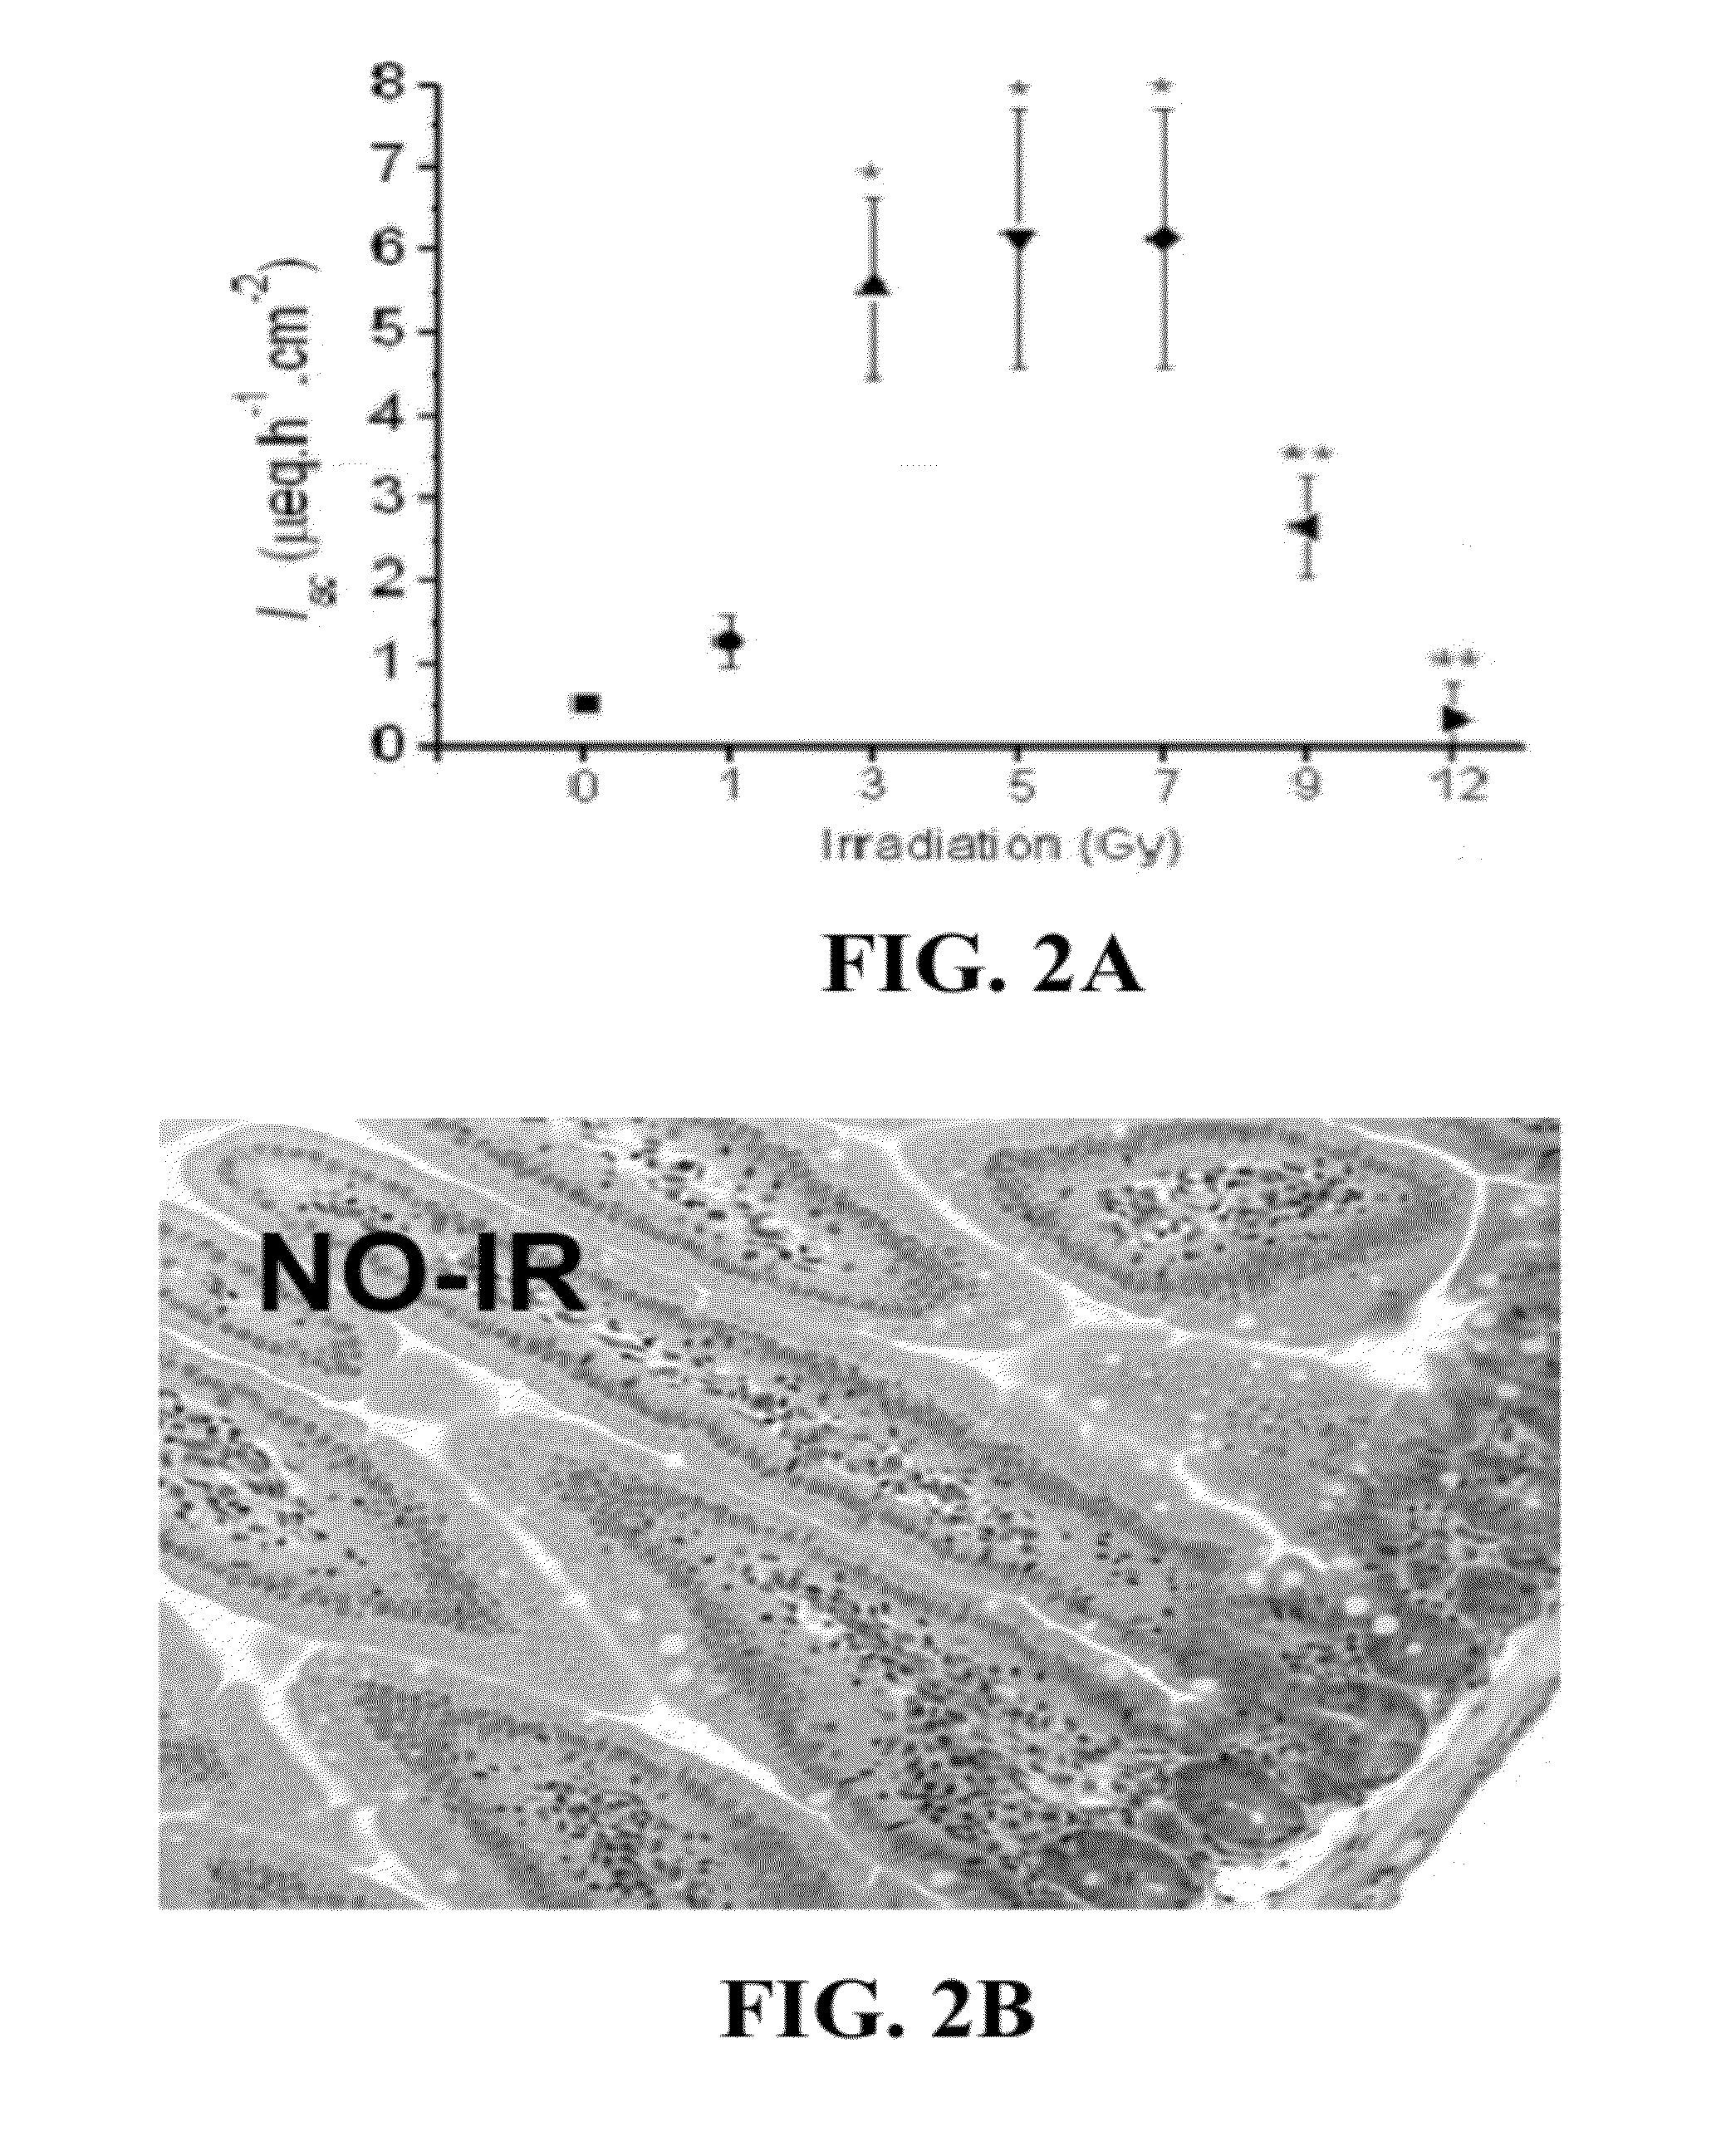 Materials and Methods for Improving Gastrointestinal Function